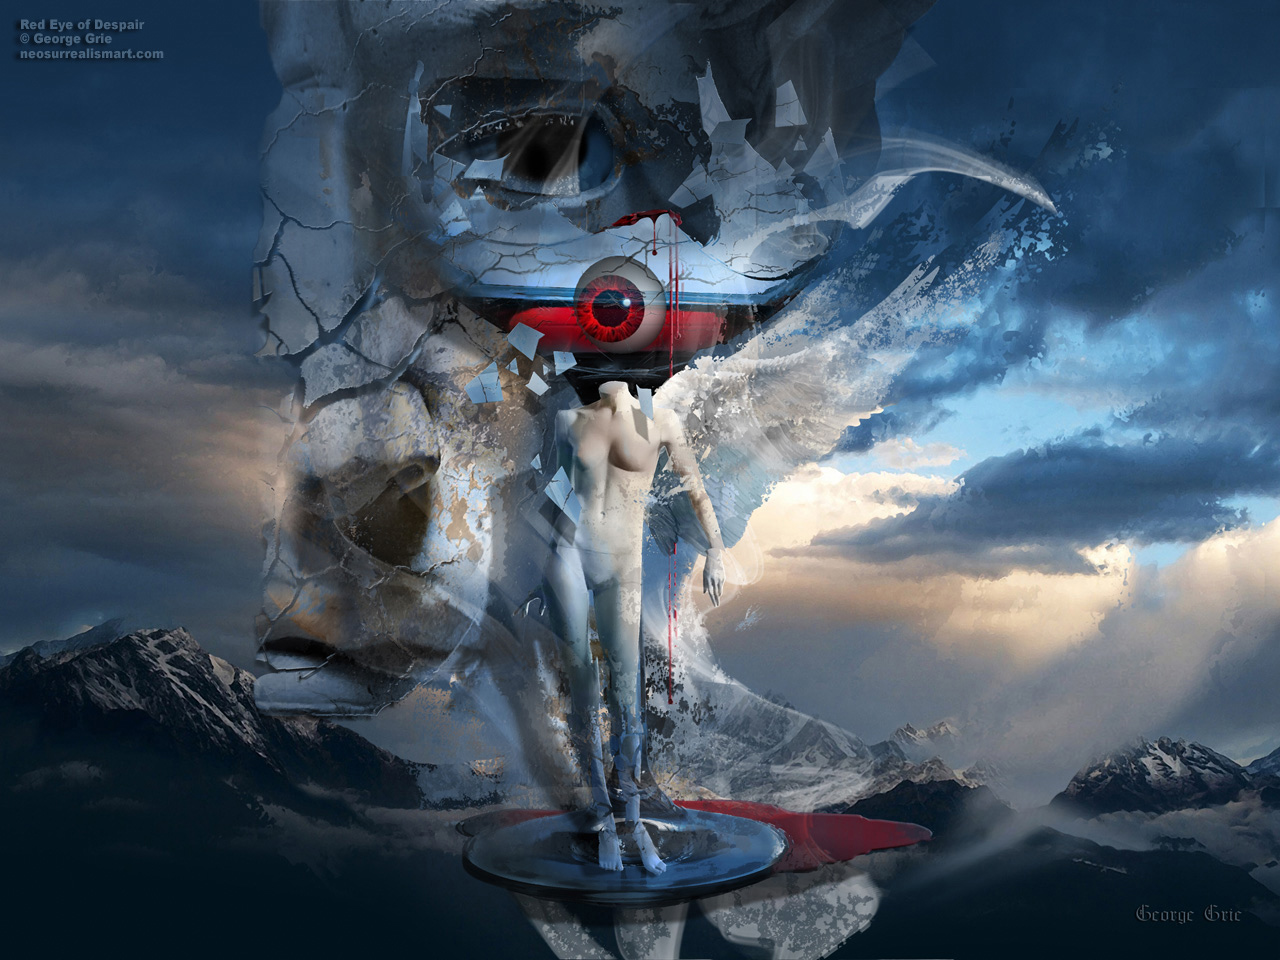 Angel, neo-surrealism, romanticism, artwork, face, sky, wallpaper, inspiration, mask,  surreal idea, blue, female, scene, mountain, digital, broken glass, gothic theme, cloud, wings, fantasy, fiction, red eye, shattered, red vine, stones, crushed, ominous, science, sculpture, figurine, cut, concept, dreaming, expression, floating, Greek, , surrealism, compilation, mysterious, person, portrait, romantic, symbol, angelic, disbelief, myth,  stained, mystical, retro, spiritual, soul, nightfall, digital, allegorical